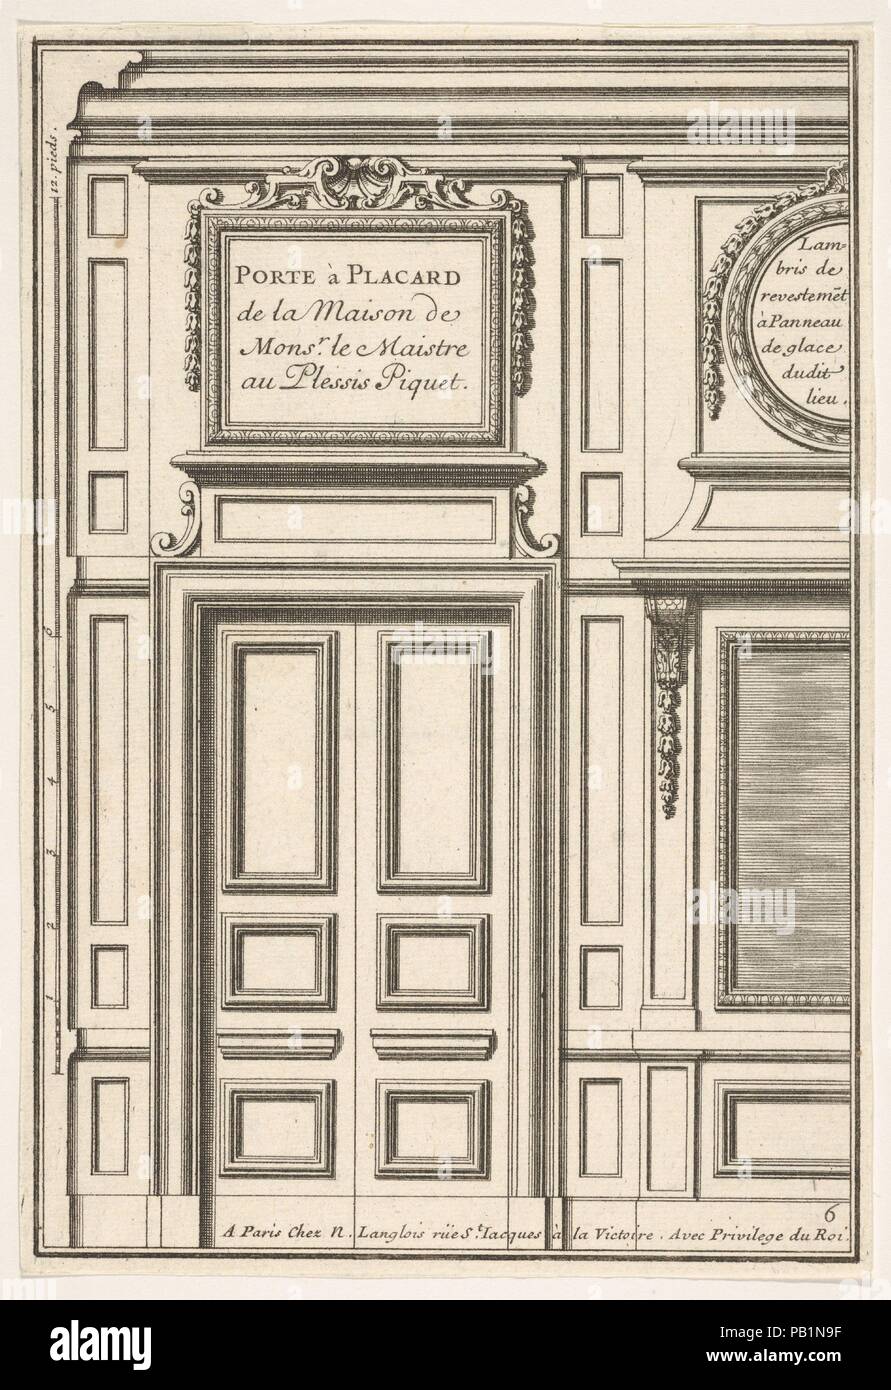 Door and Part of the Wall Paneling with Mirrored Glass from the House of 'Monsieur le Maître' at Plessis Piquet, plate VI from the Series 'Portes a Placard et Lambris', published as part of 'L'Architecture à la Mode'. Dimensions: image: 7 11/16 x 5 5/16 in. (19.5 x 13.5 cm). Etcher: Jean Le Pautre (French, Paris 1618-1682 Paris). Publisher: Nicolas Langlois (French, Paris 1640-1703). Date: 17th century. Museum: Metropolitan Museum of Art, New York, USA. Stock Photo